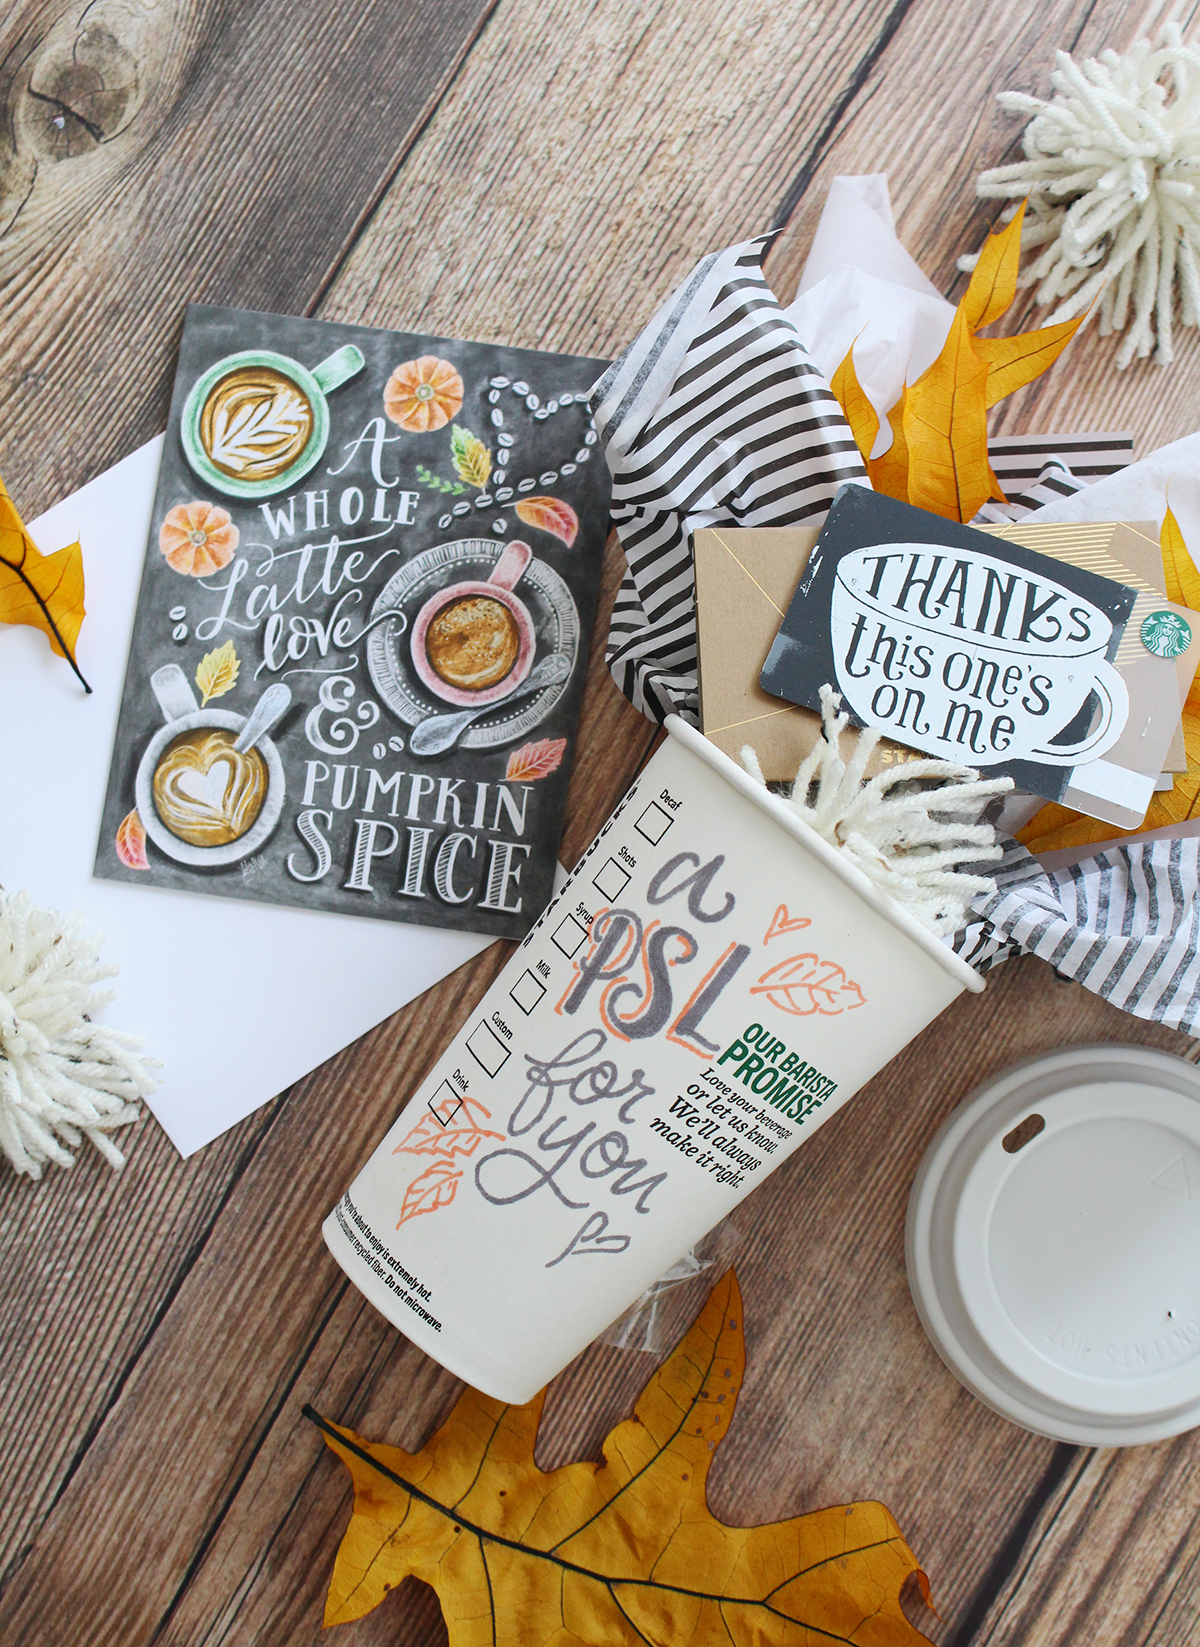 An easy fall gift idea for spreading the pumpkin spice love: hand letter on a starbucks cup, then fill it with a $5 Starbucks gift card and a Lily & Val Pumpkin spice latte card!